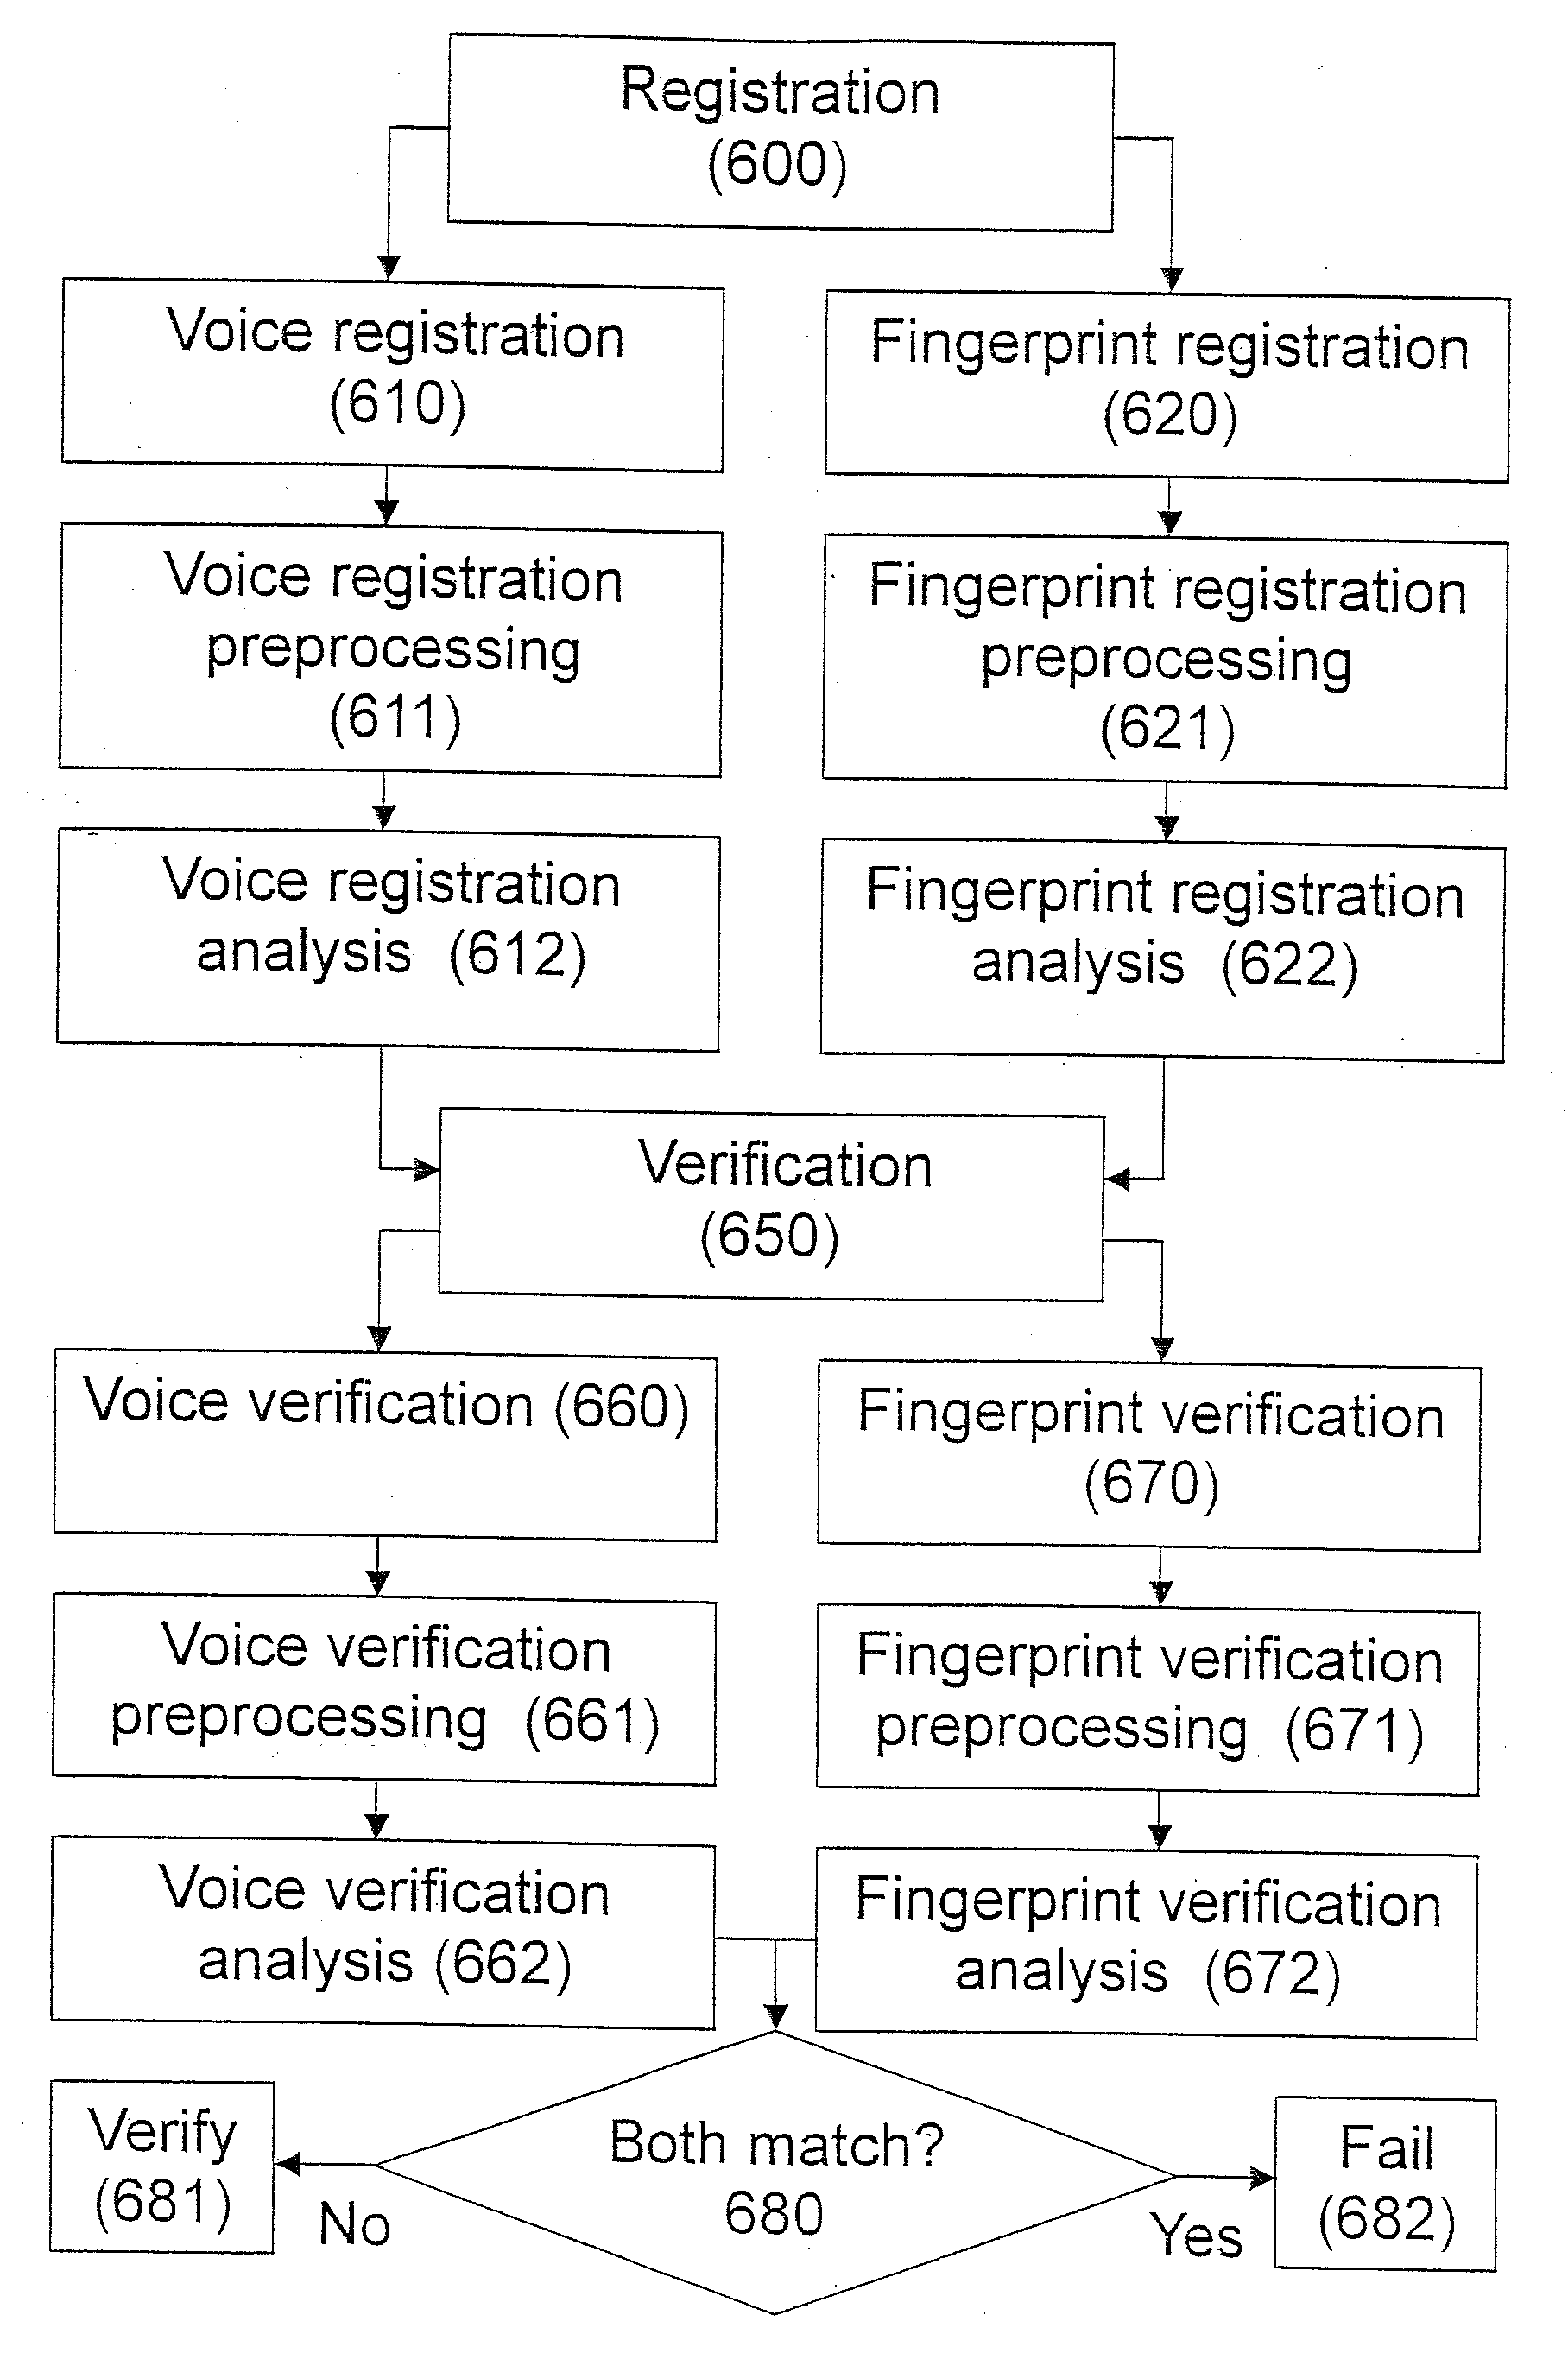 A system and a method for verifying identity using voice and fingerprint biometrics